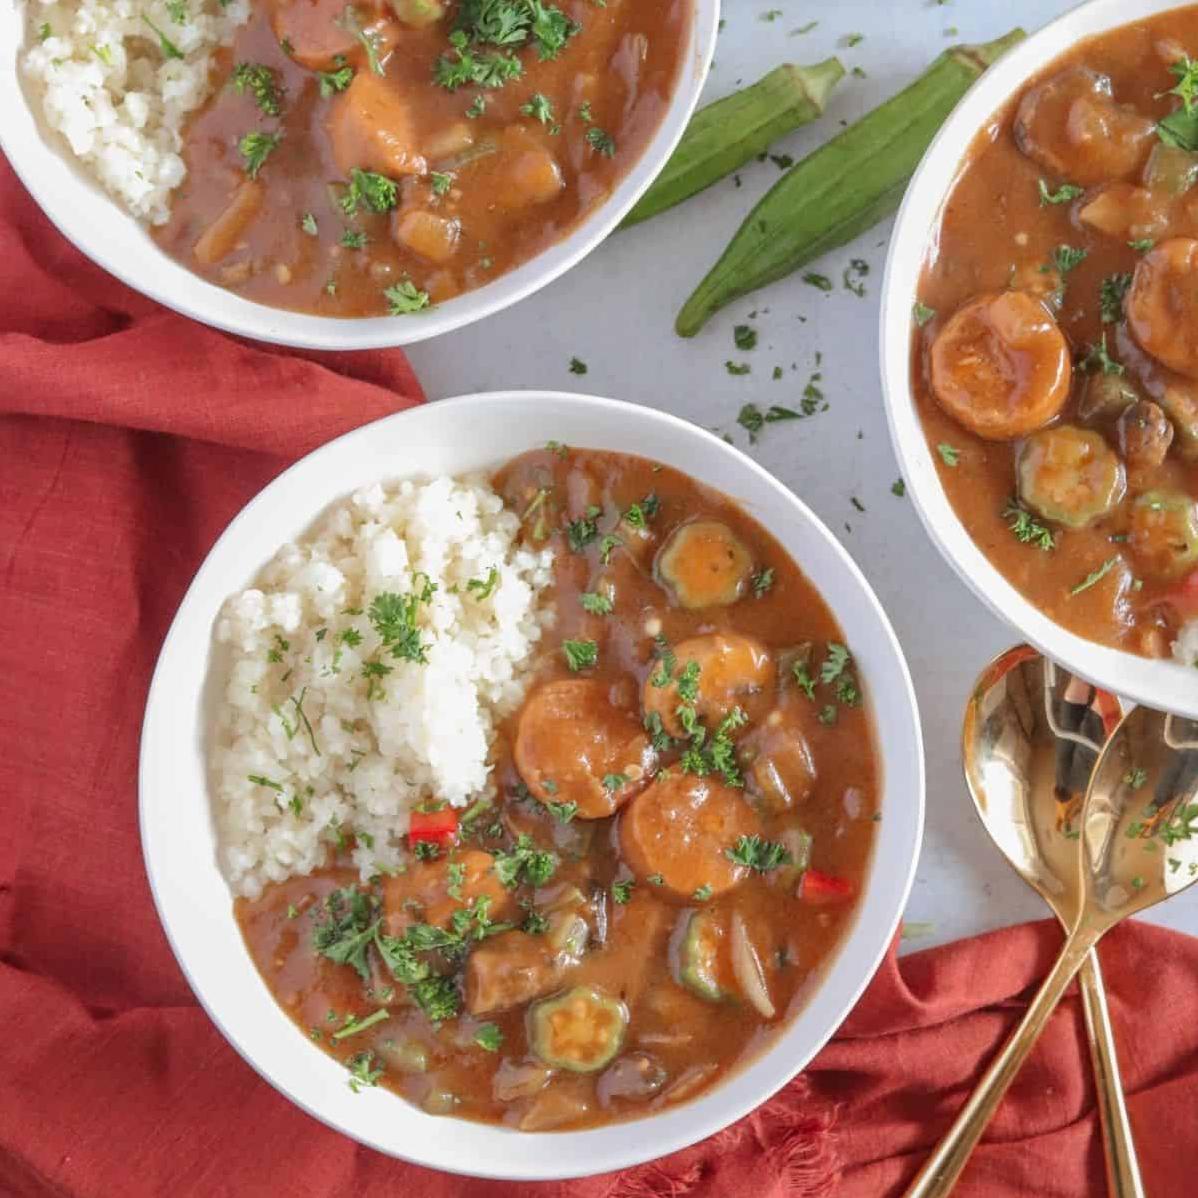  This gluten-free gumbo is perfect for cozy nights in, and even better as leftovers the next day.